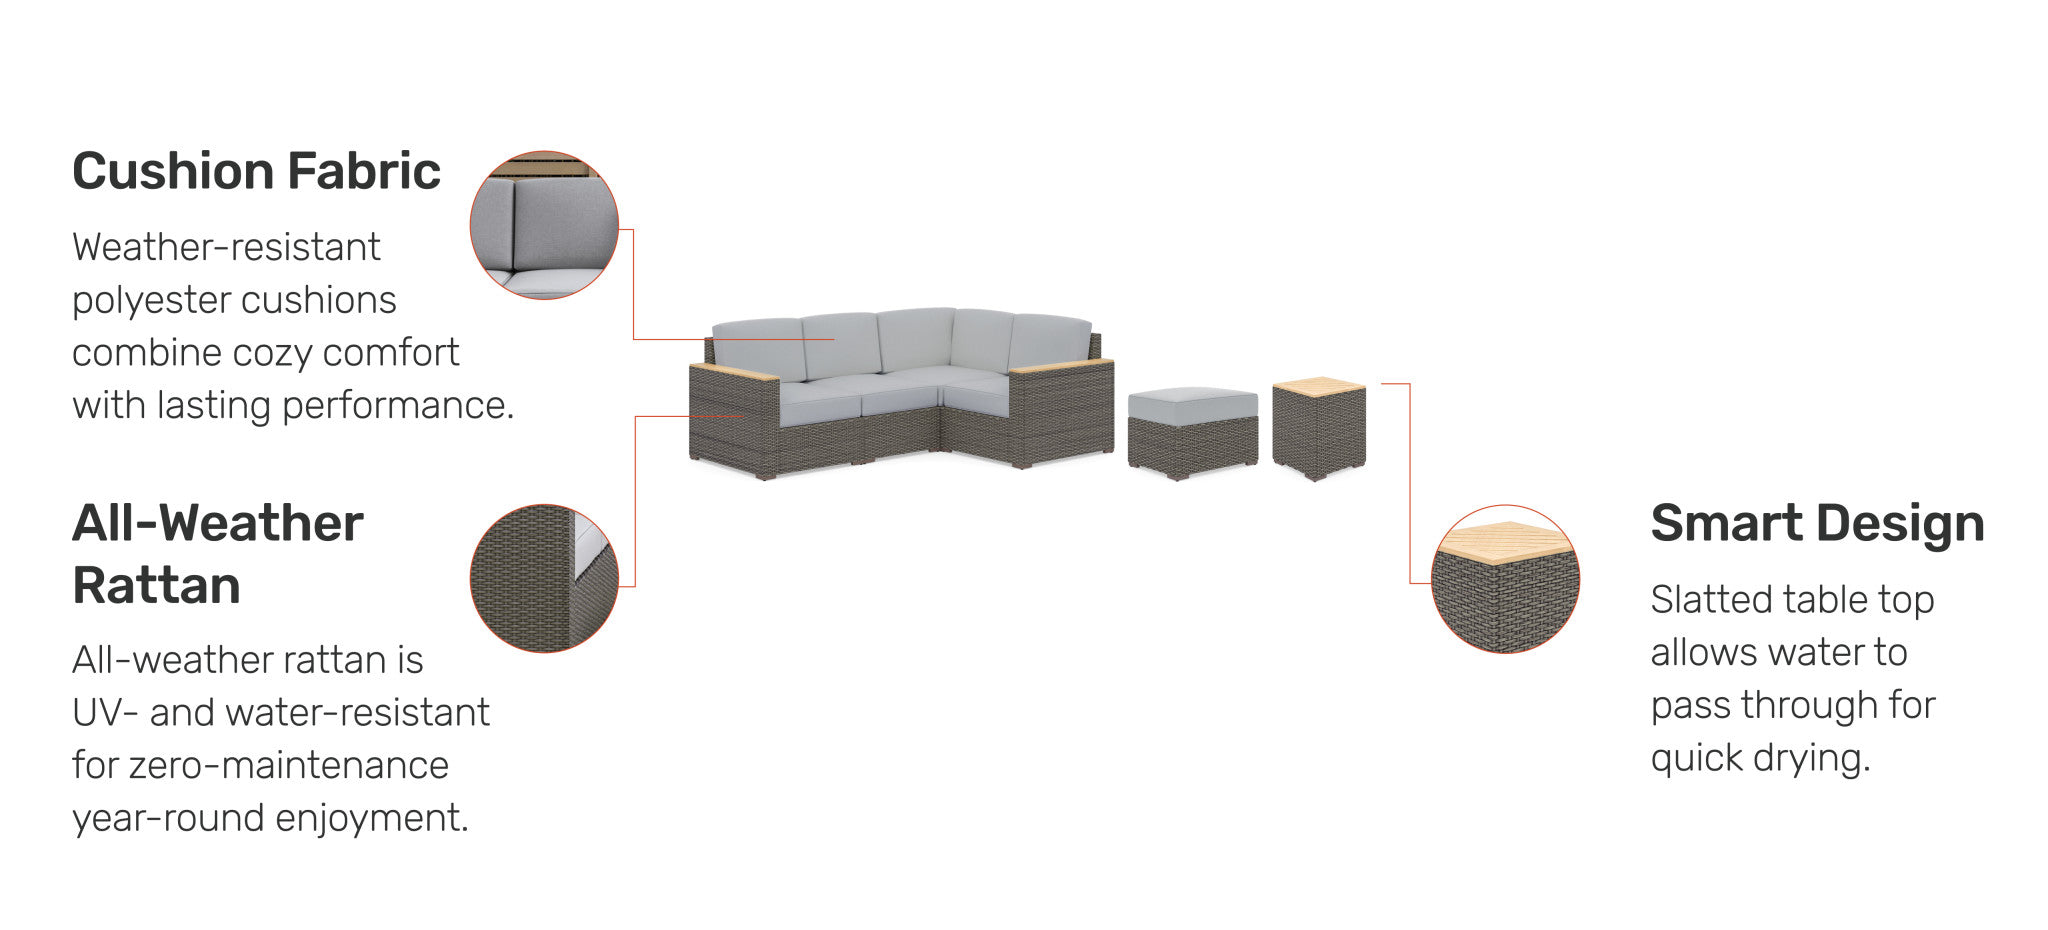 Boca Raton Outdoor 4 Seat Sectional, Ottoman and Side Table by Homestyles - Brown - Rattan - 6801-49-T